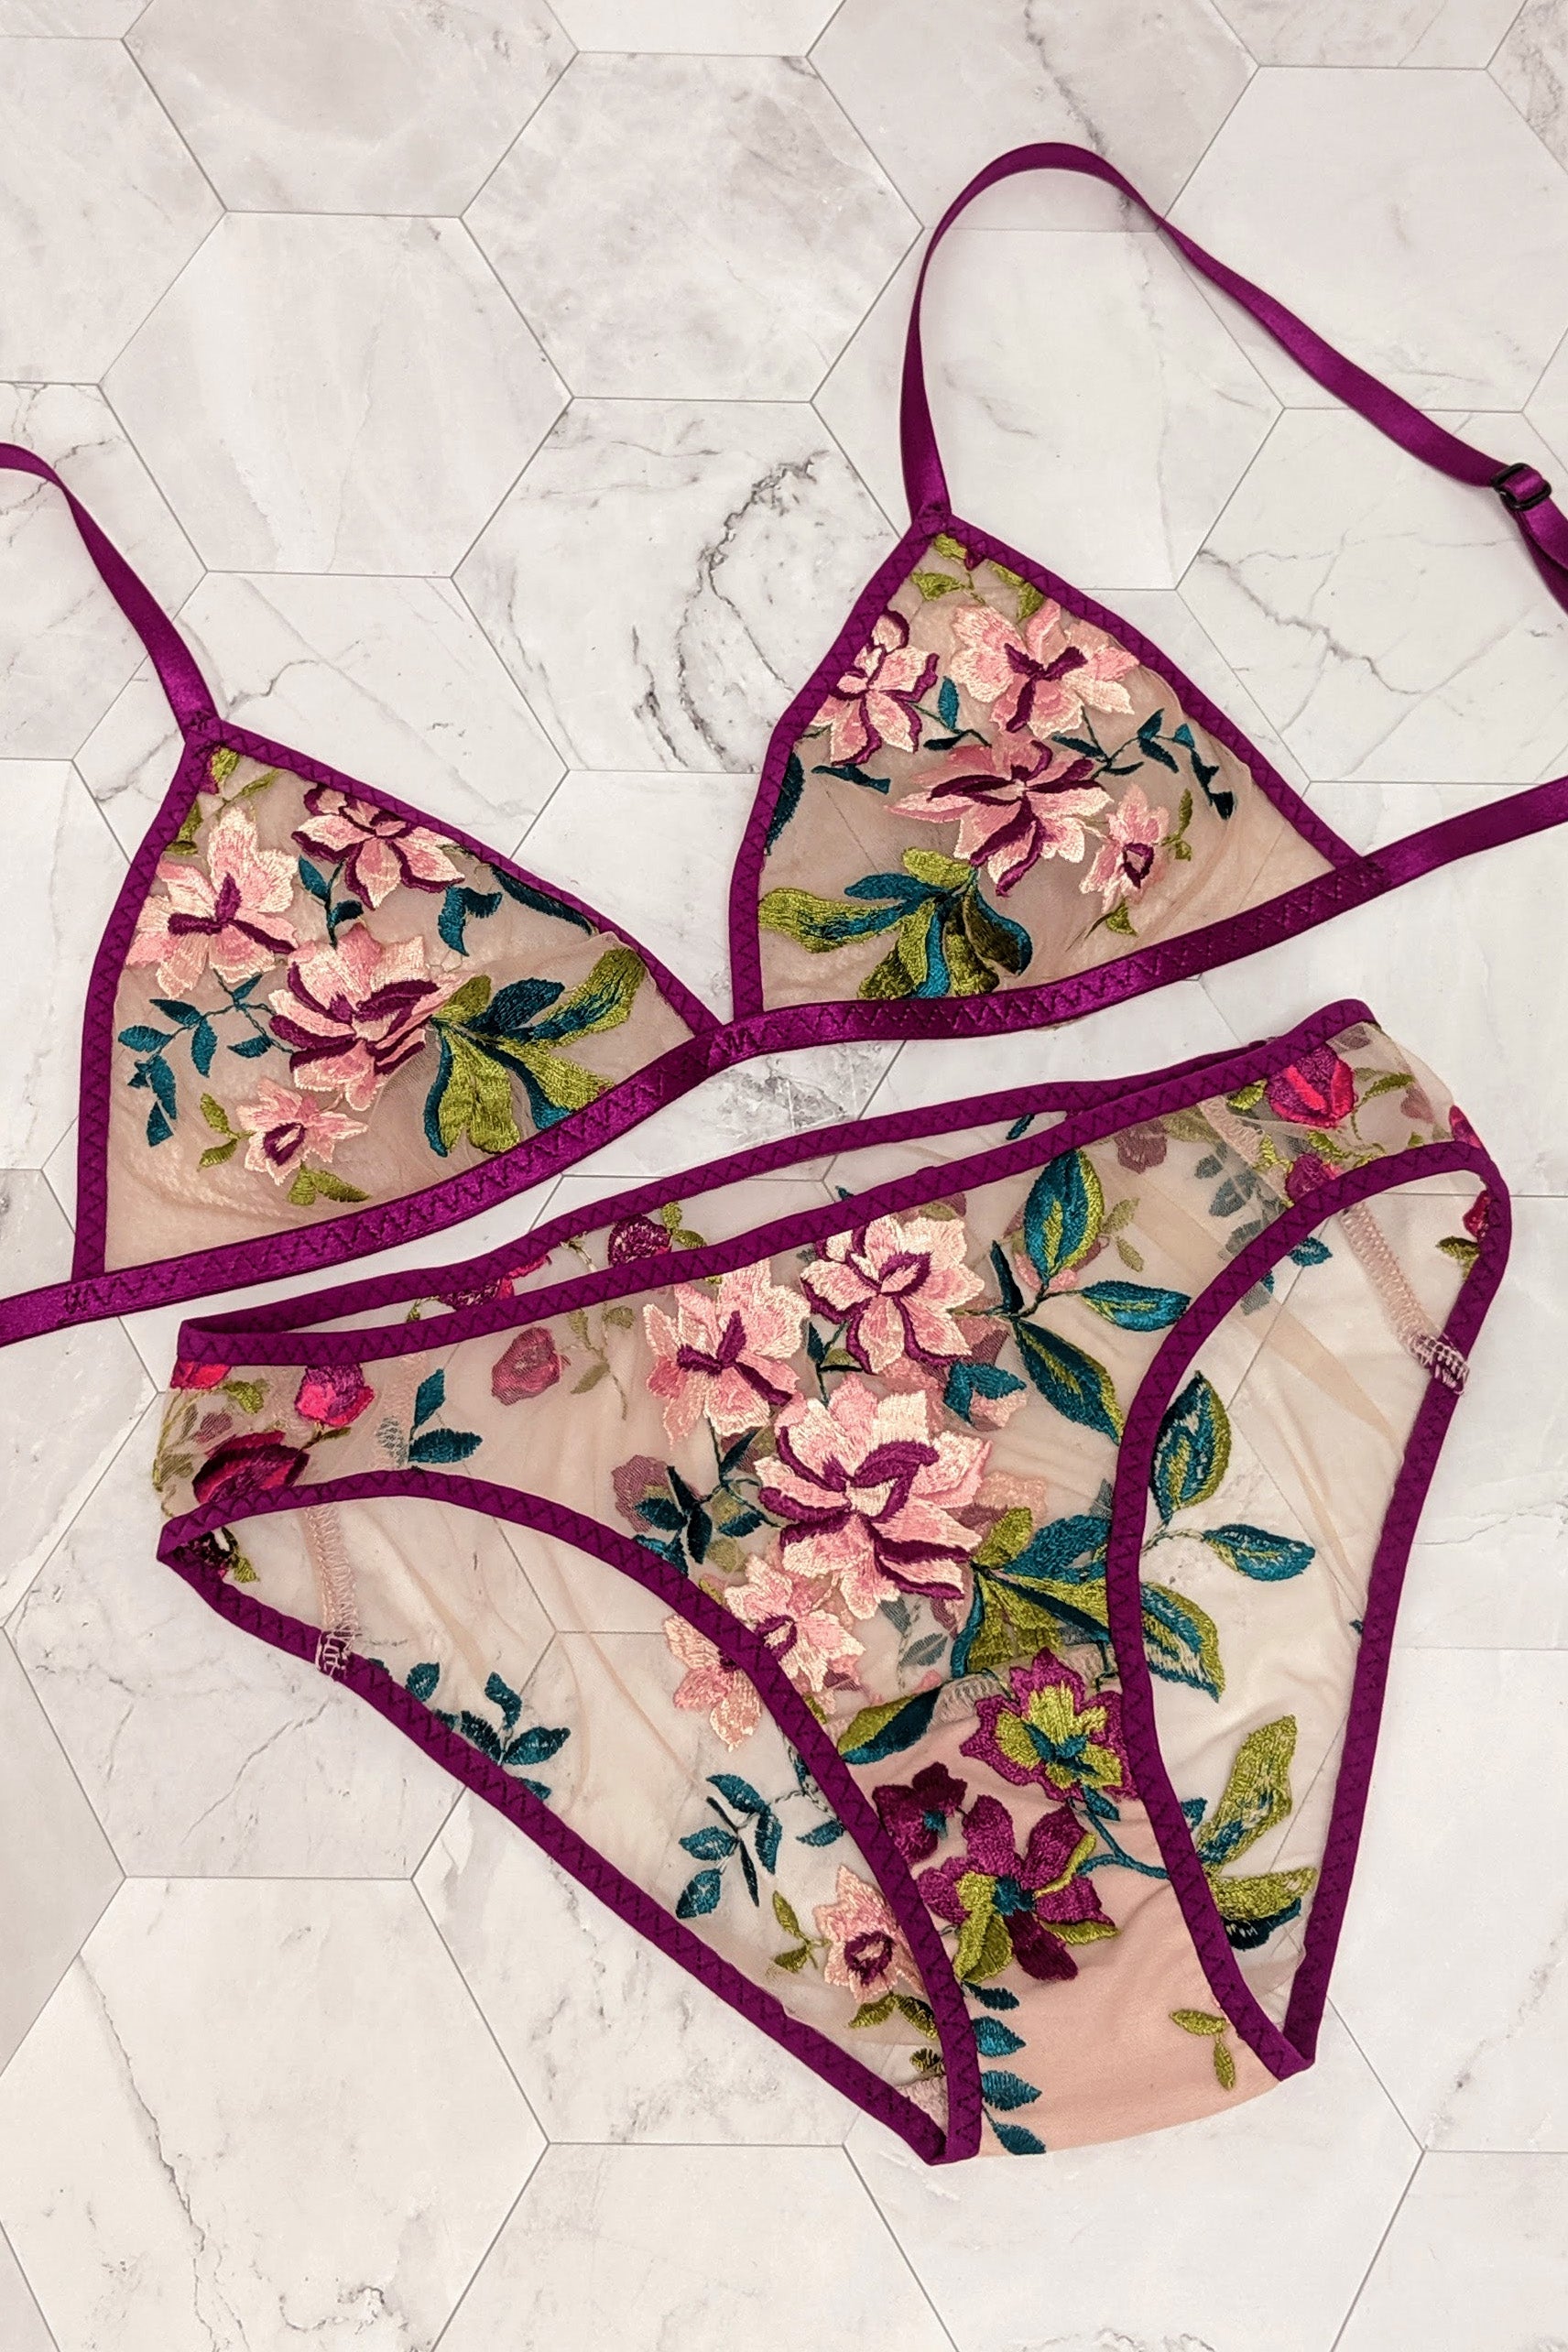 Camellia lingerie set from The English Garden collection by Angela Friedman